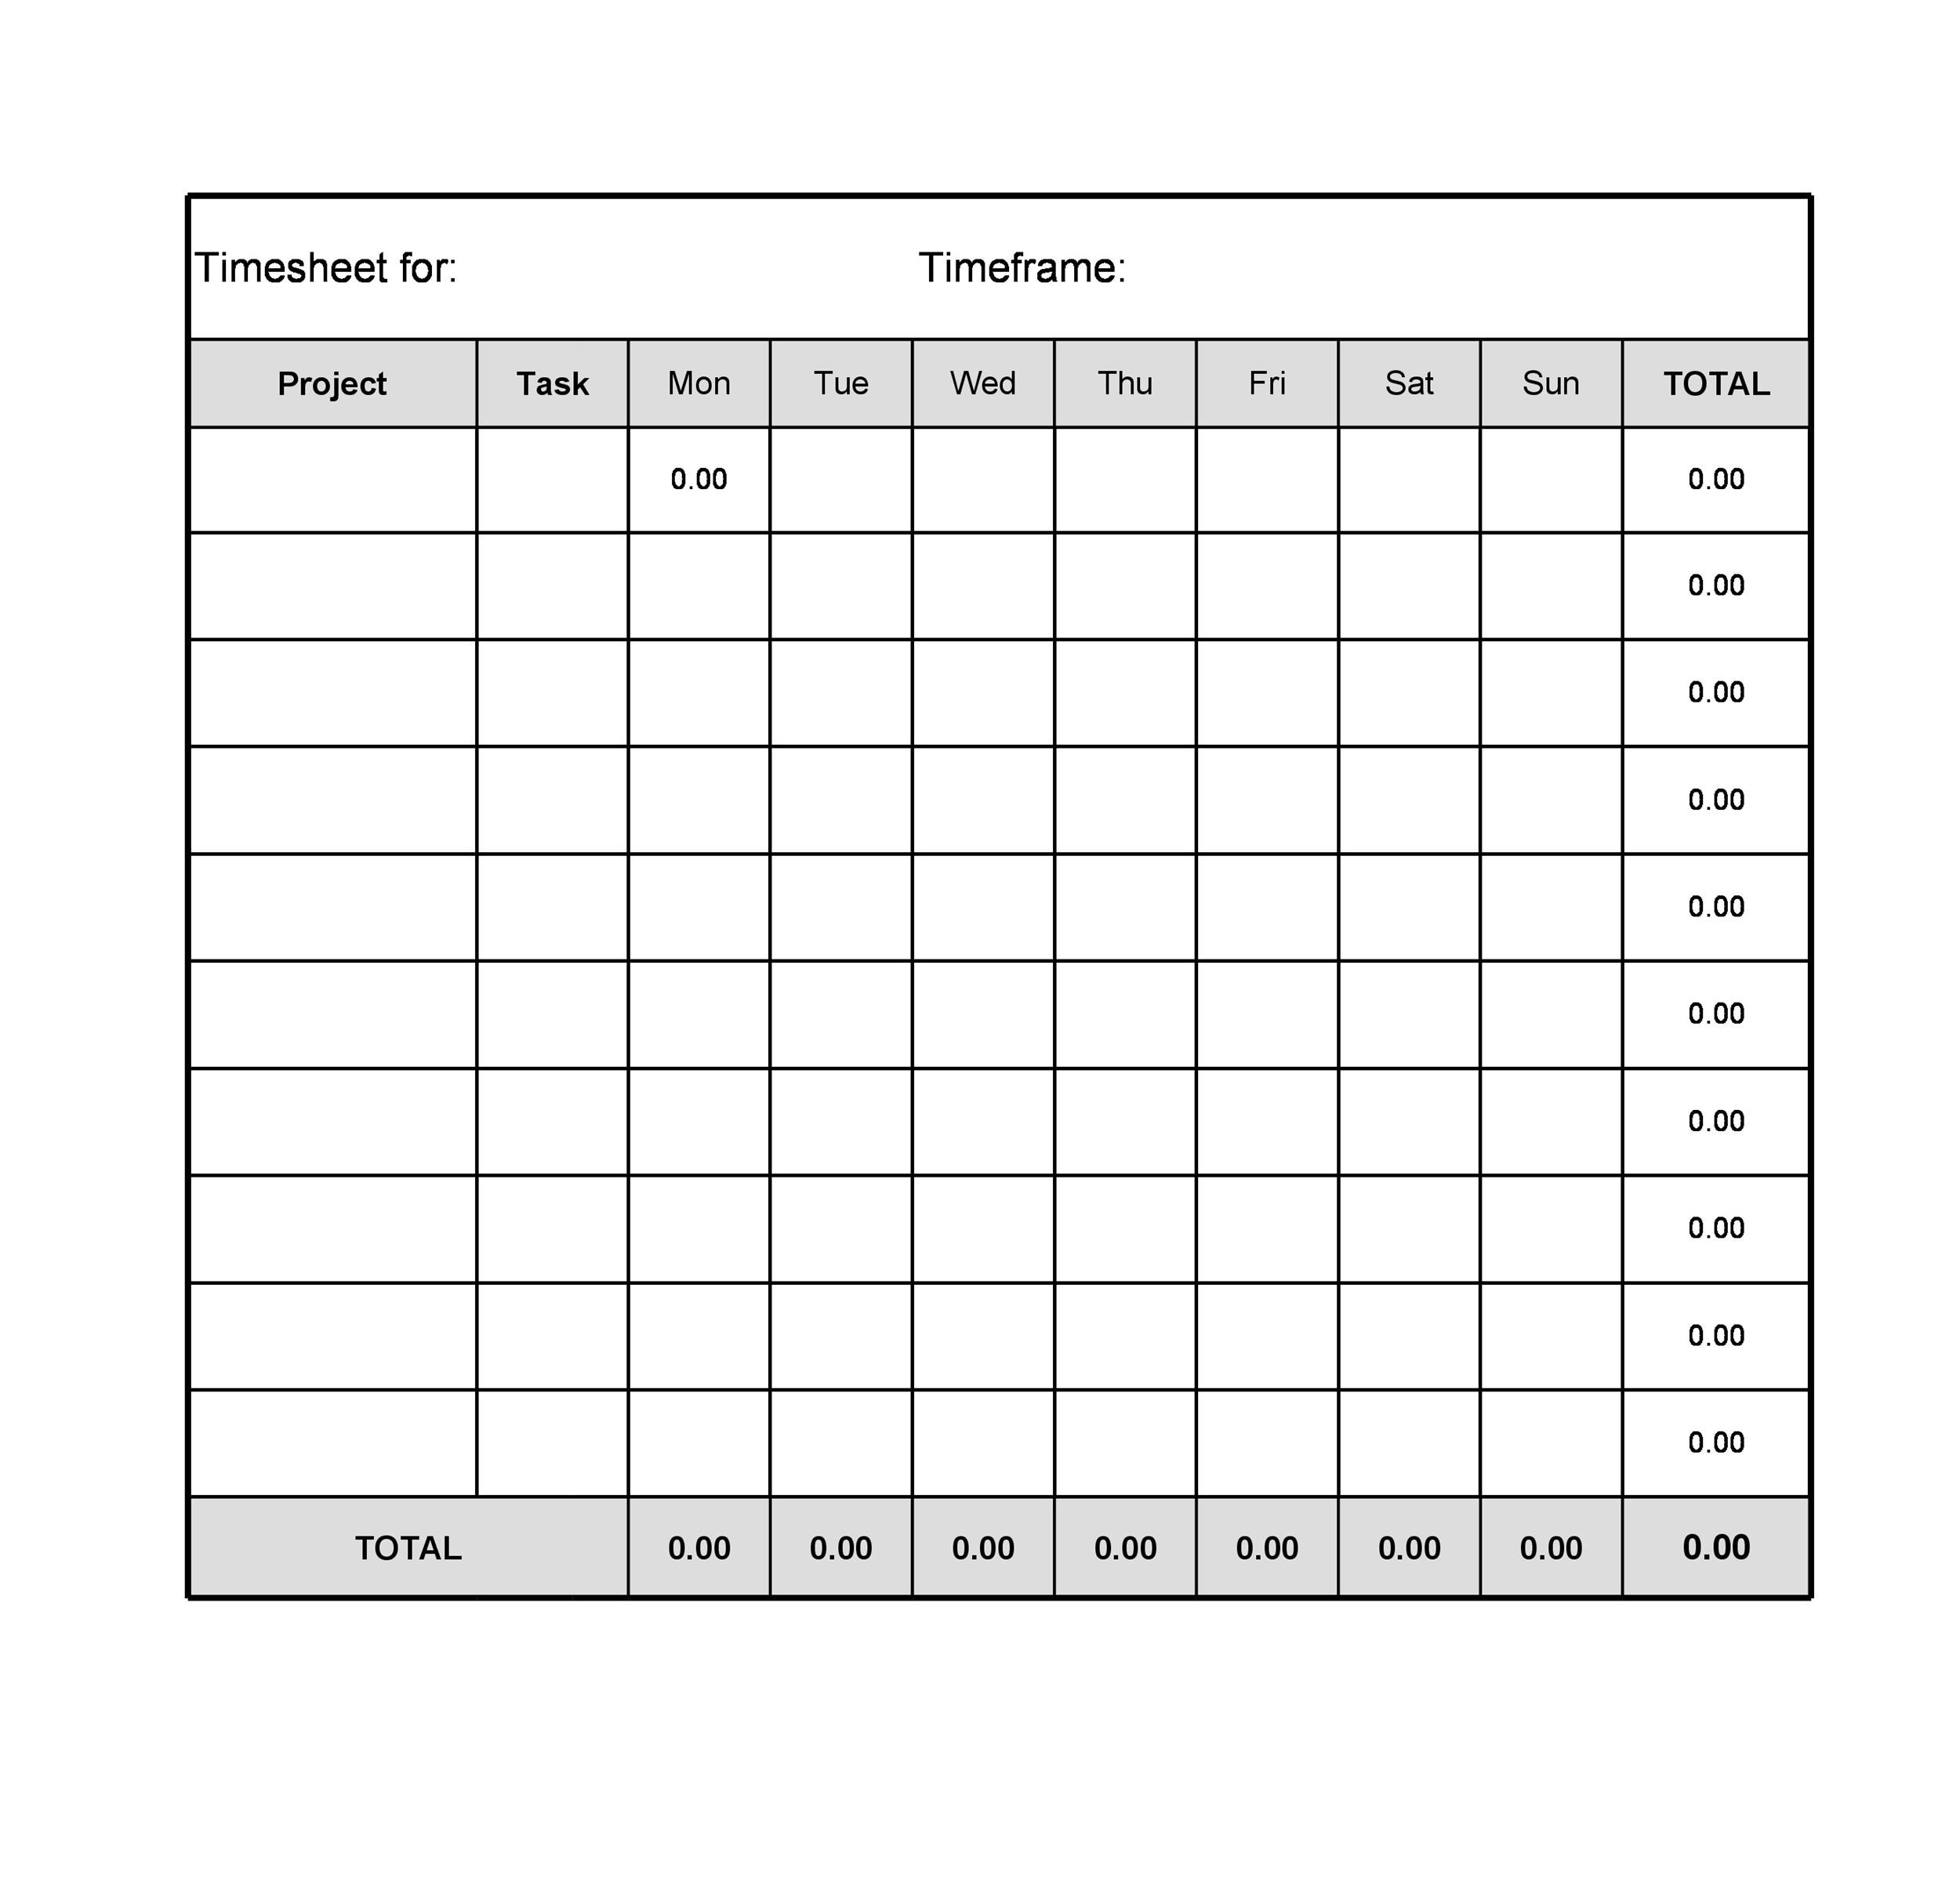 40 Free Timesheet Templates in Excel ᐅ TemplateLab